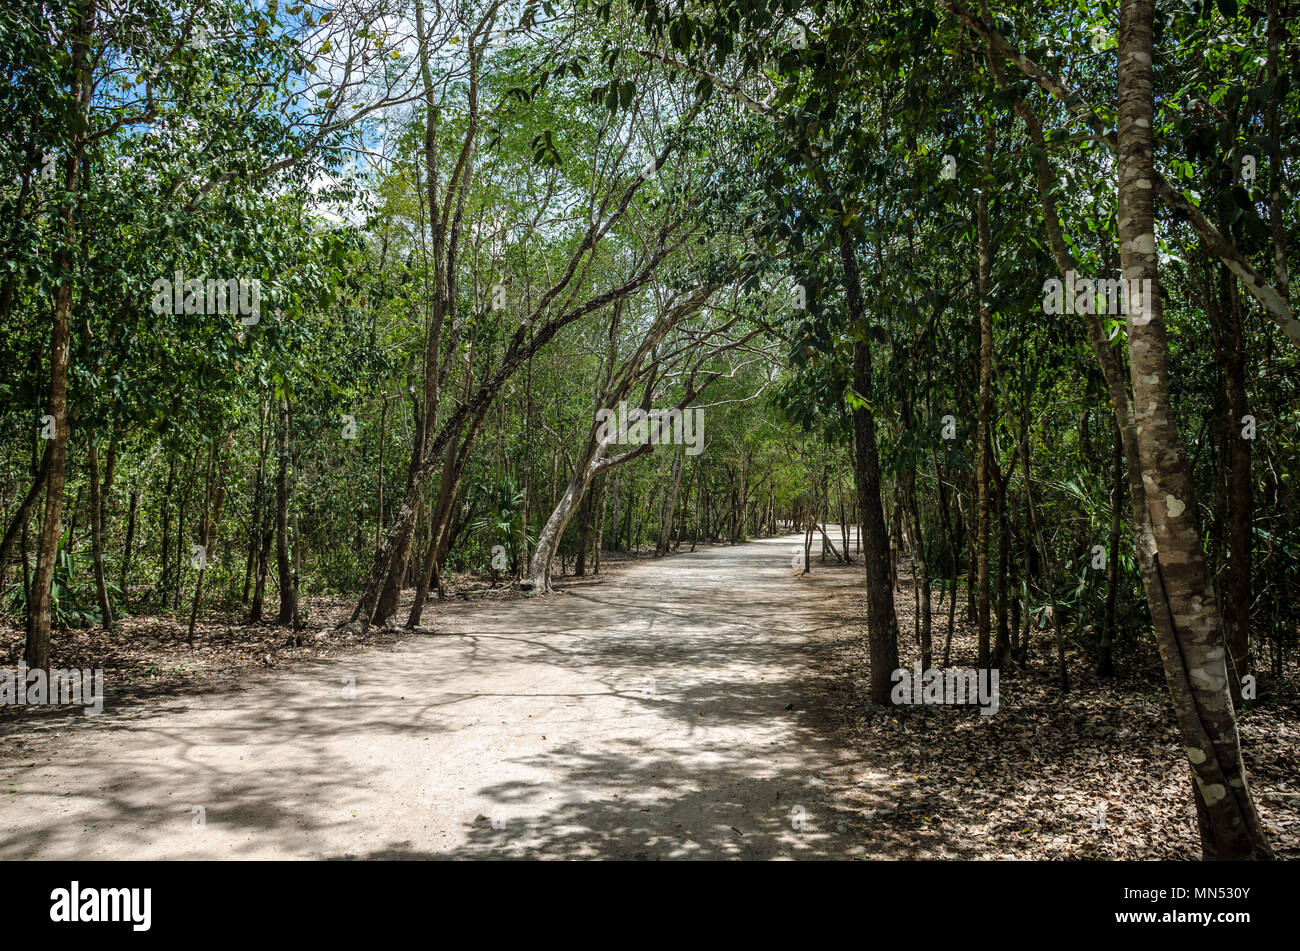 Roads made by the ancient mayas of Mexico Stock Photo